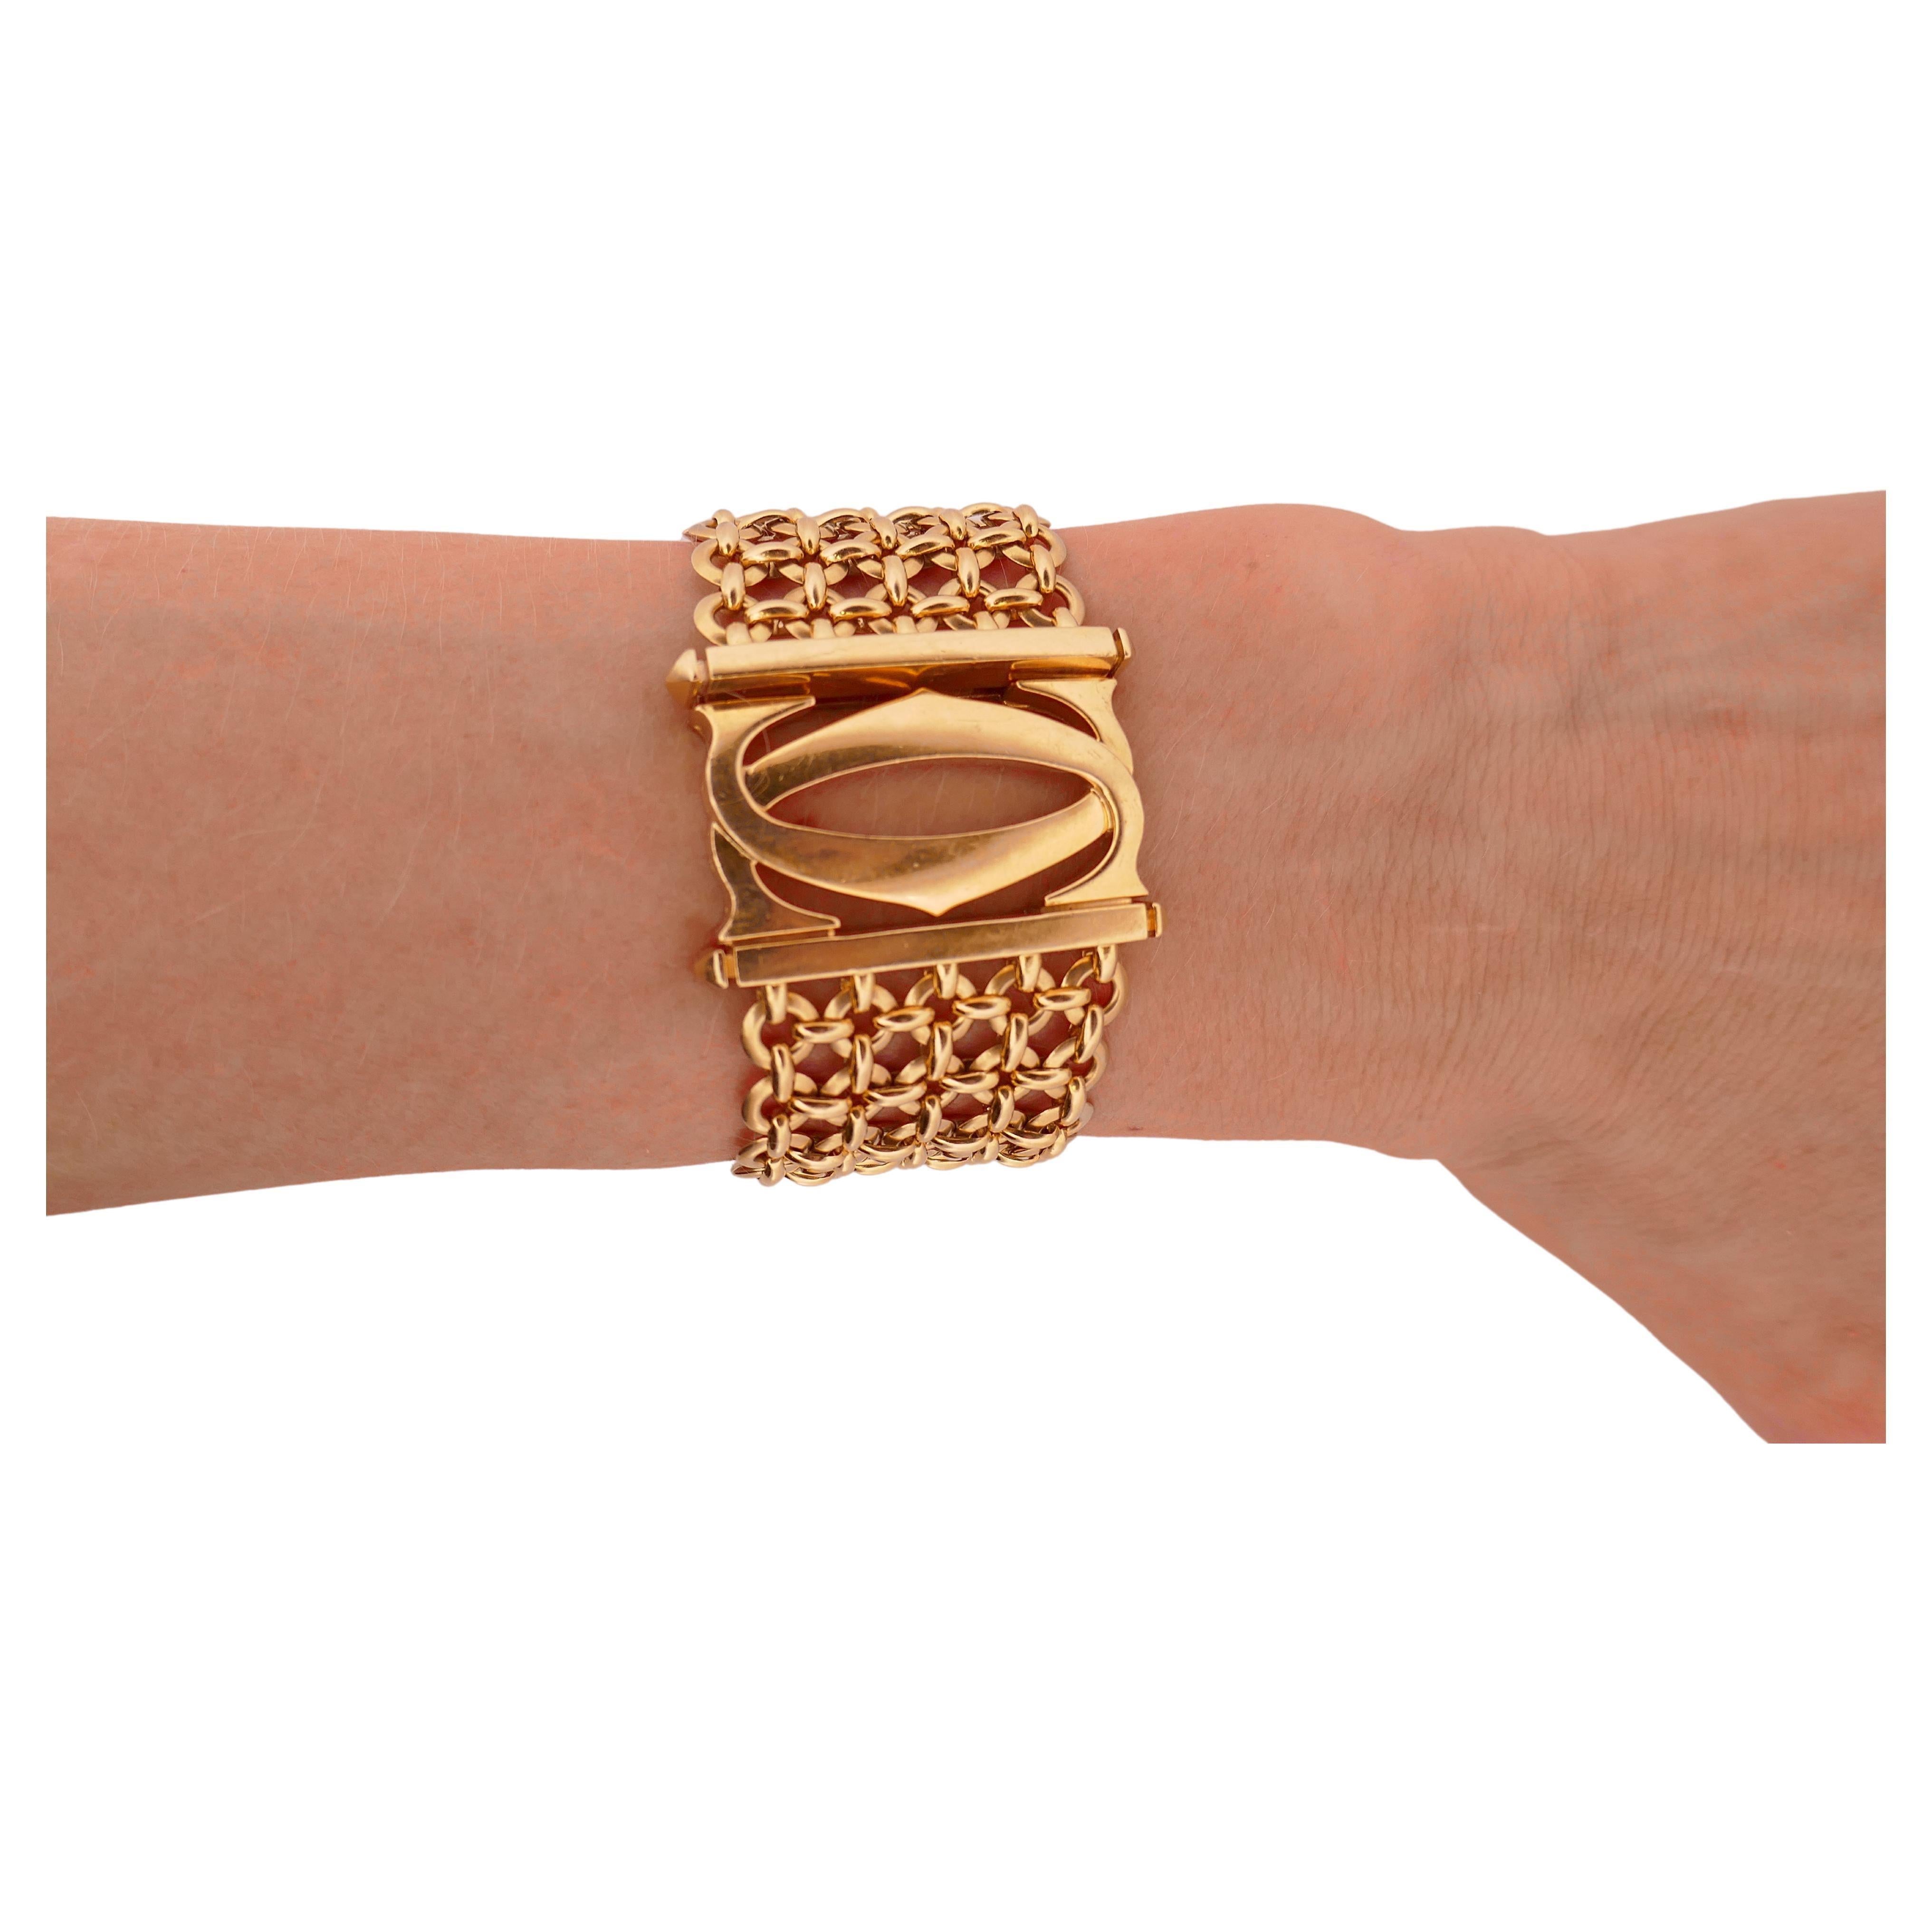 A vintage Cartier Double C 18k gold bracelet from Penelope collection. 
It's a mesh five-row link bracelet with a closure designed as the interlocking double C motif (the Cartier logo). The closure is a hidden push down clasp. 
The mesh comprises of